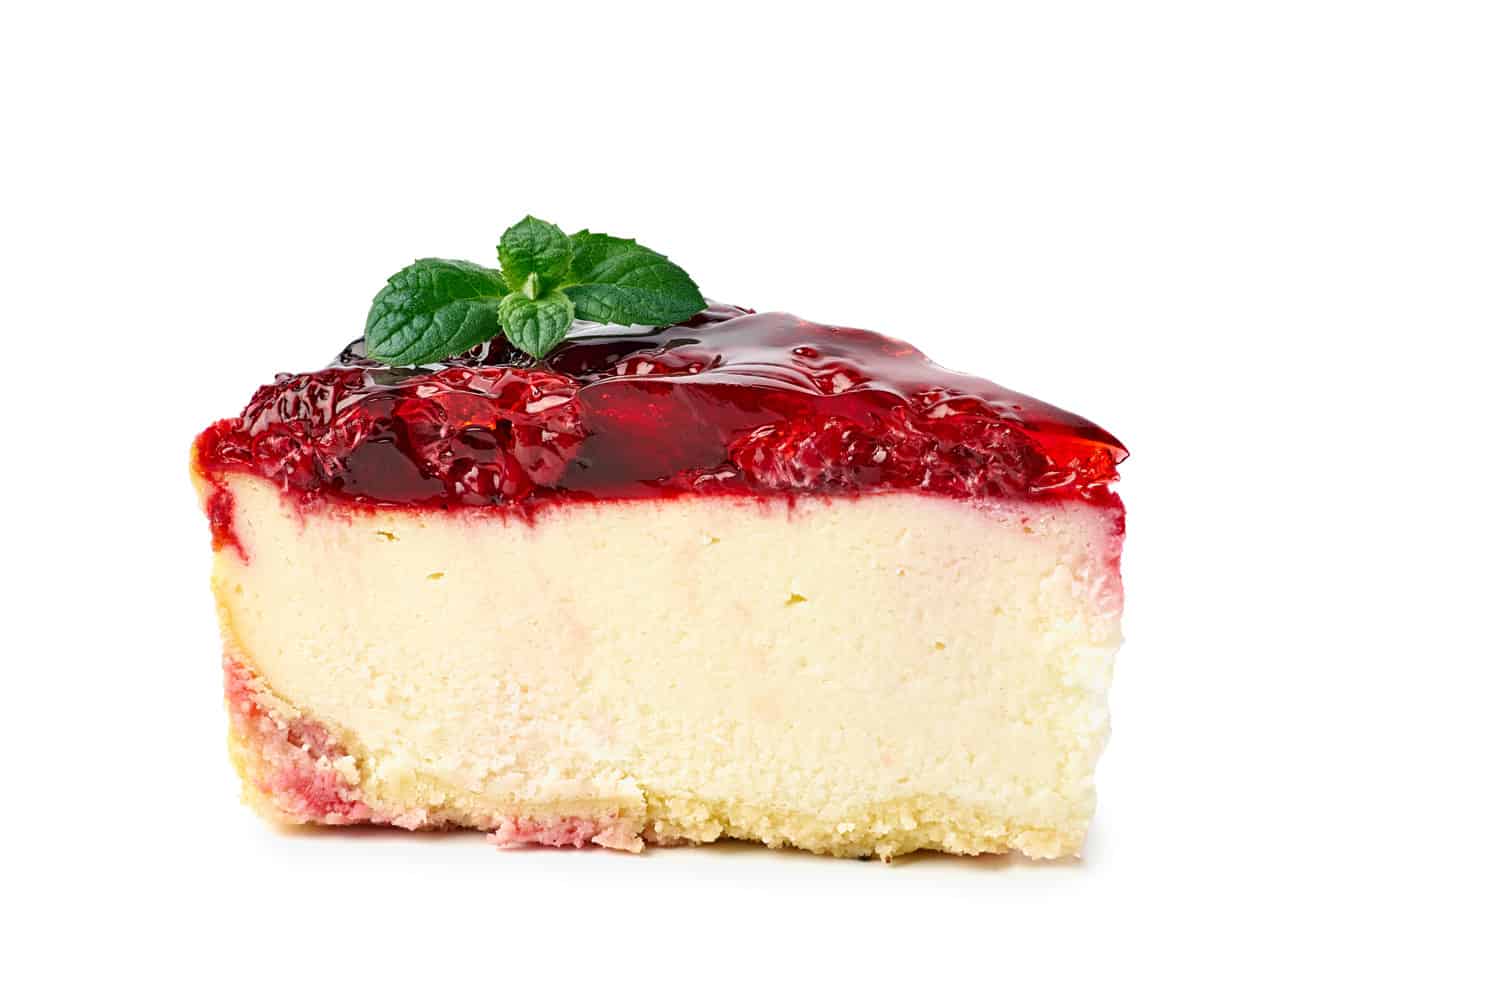 Piece of cheesecake with raspberries topping isolated on white.